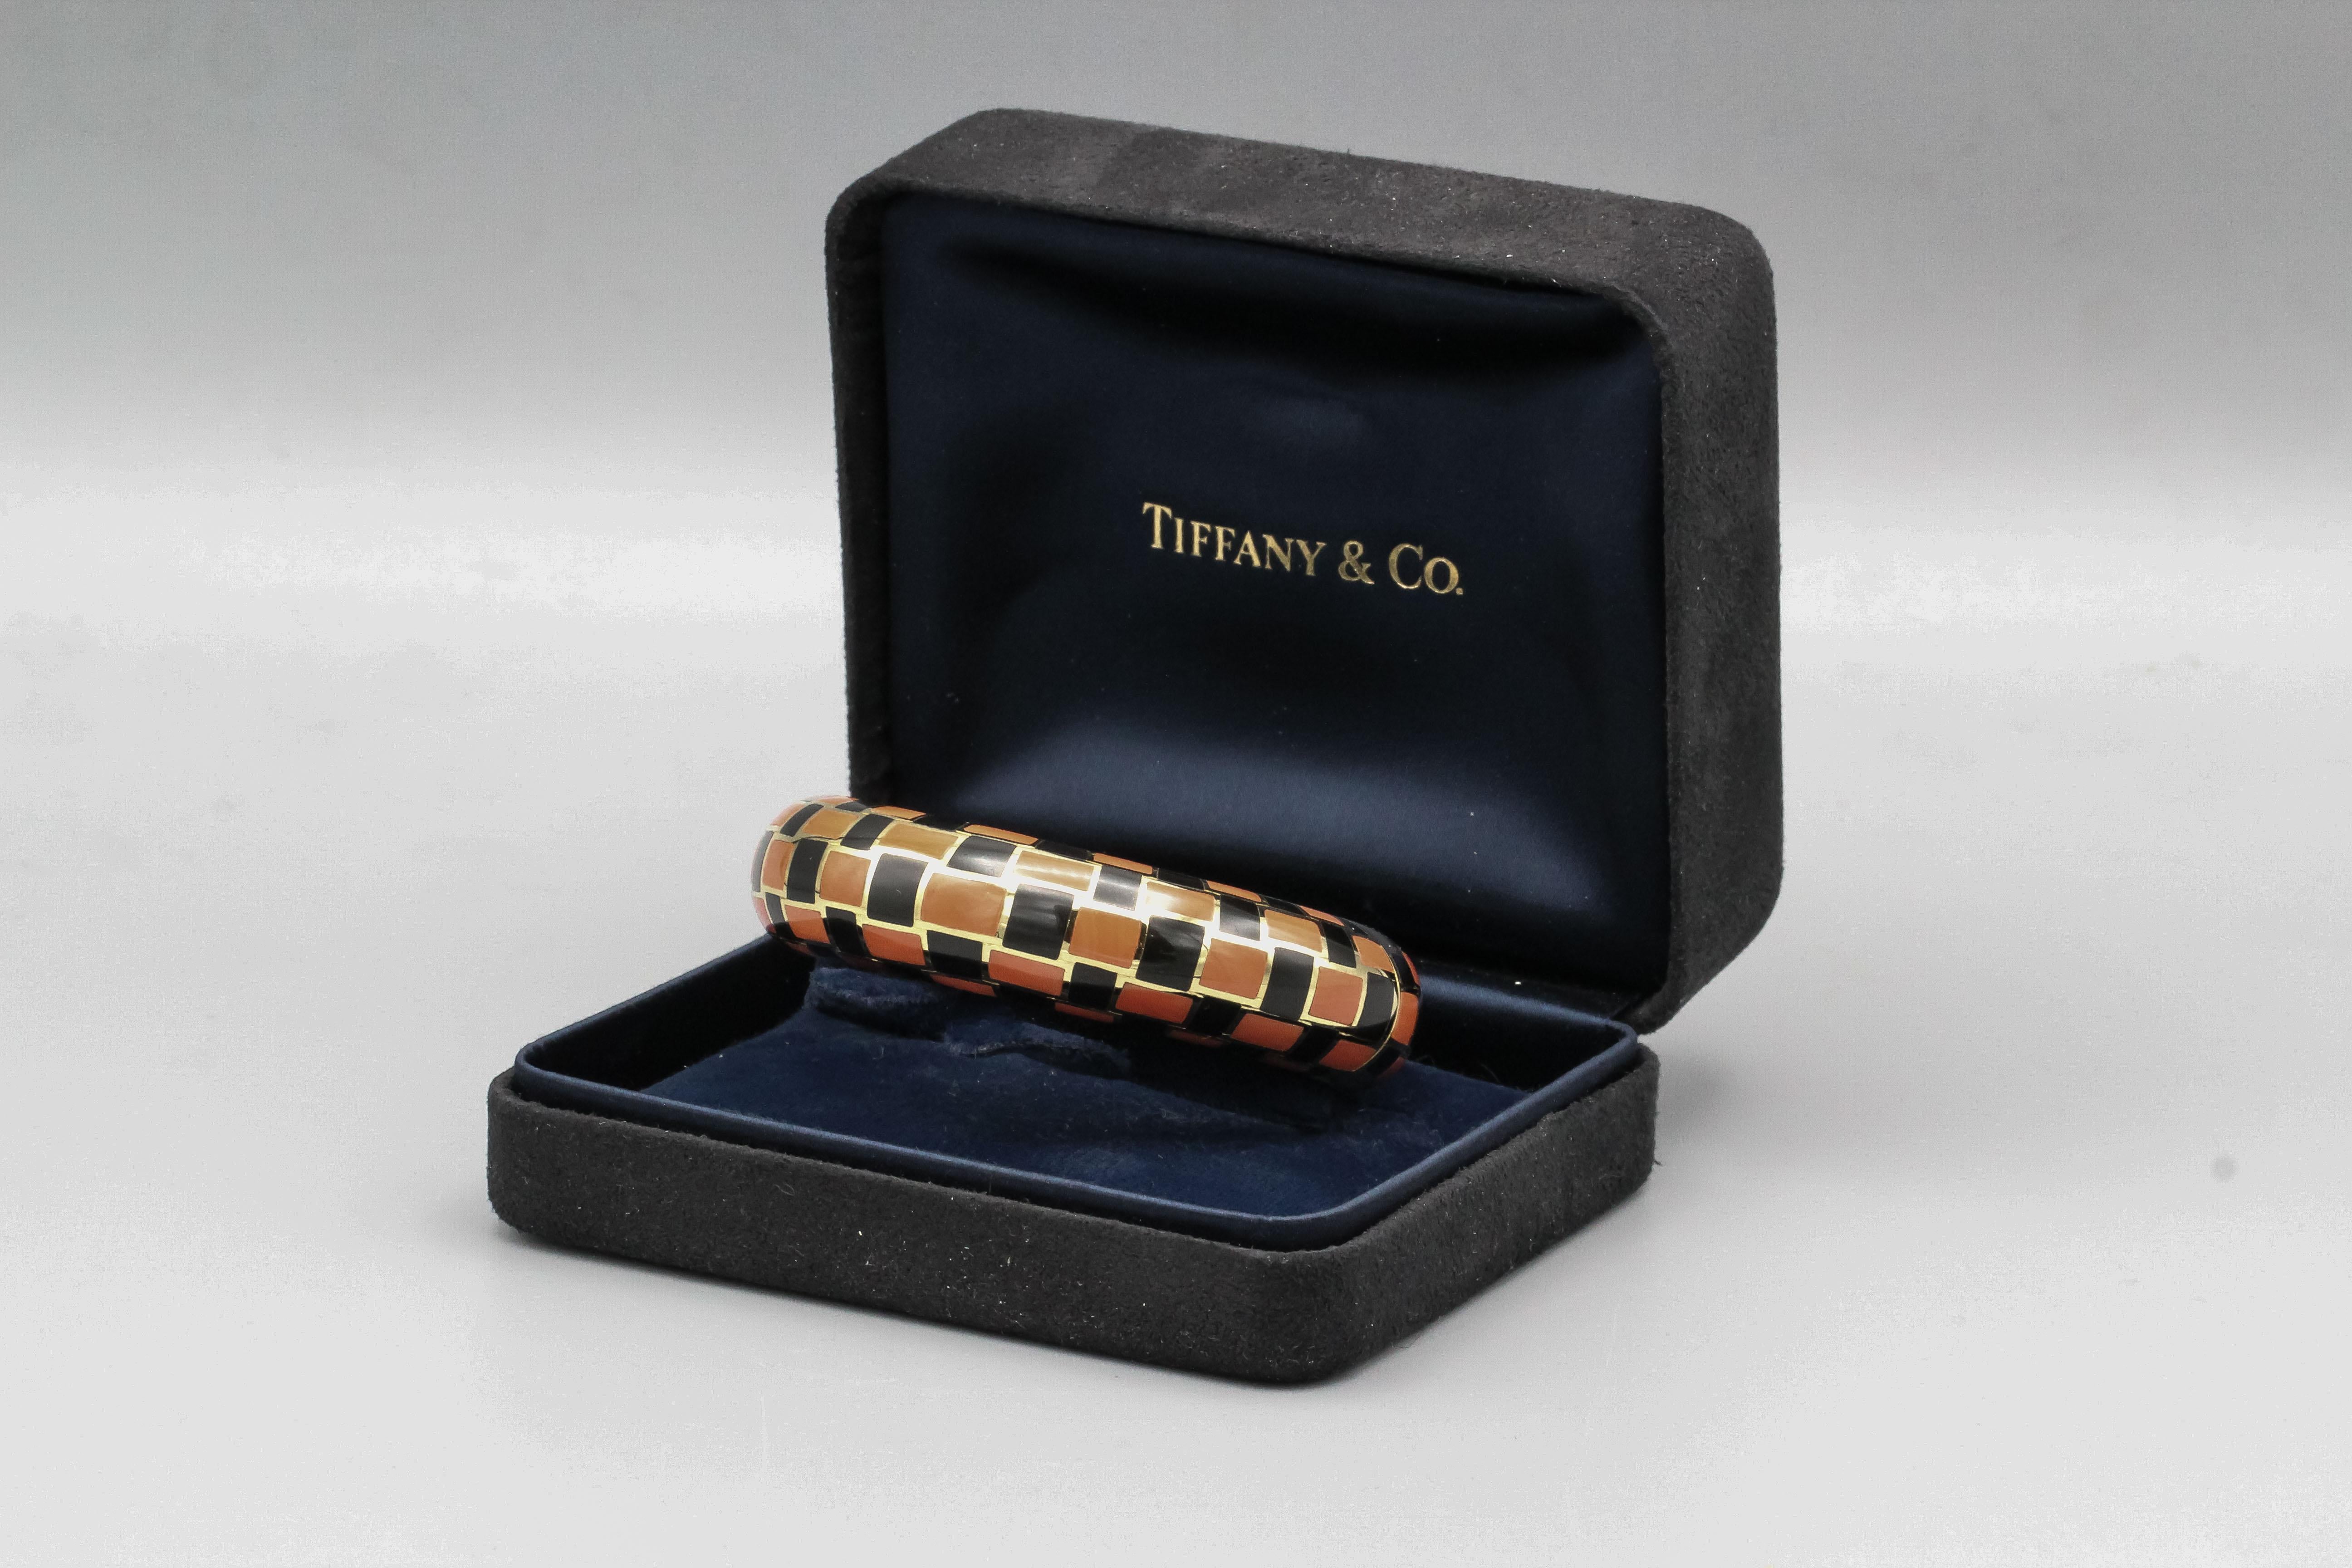 Very fine 18K yellow gold bangle bracelet with inlaid coral and black jade, by Tiffany & Co. designed by Angela Cummings circa 1970s. It features a chic  checkered pattern that is stylish and distinctive.  Will comfortably fit a 6-6.25